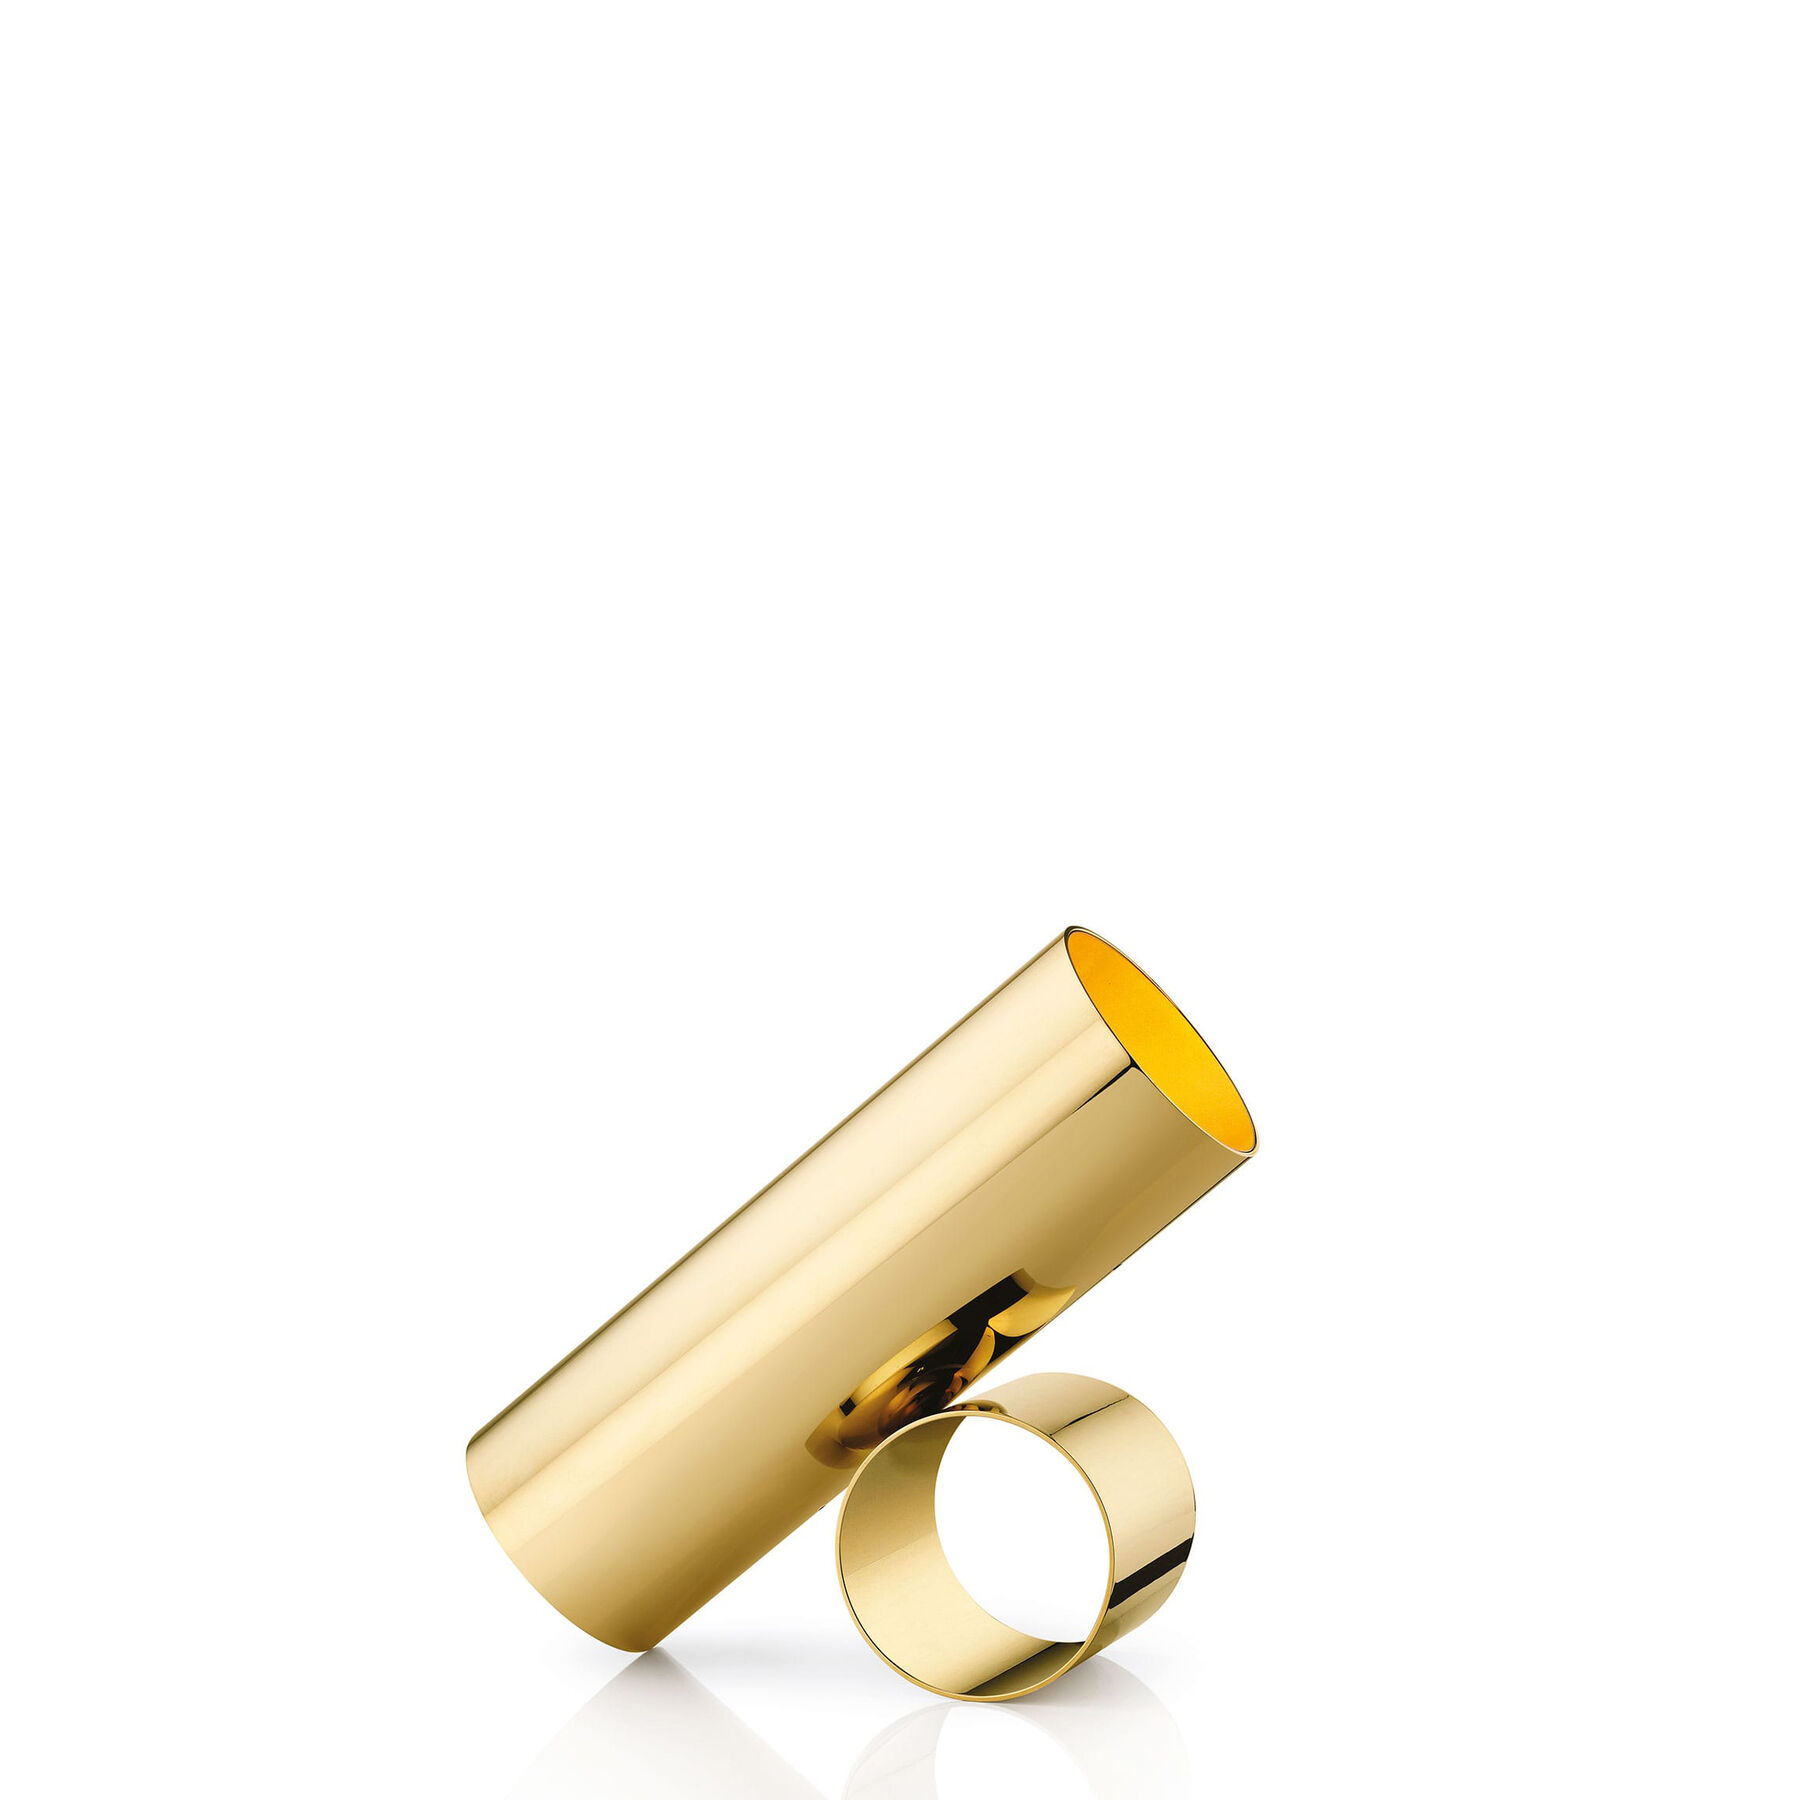 Anodized Gold